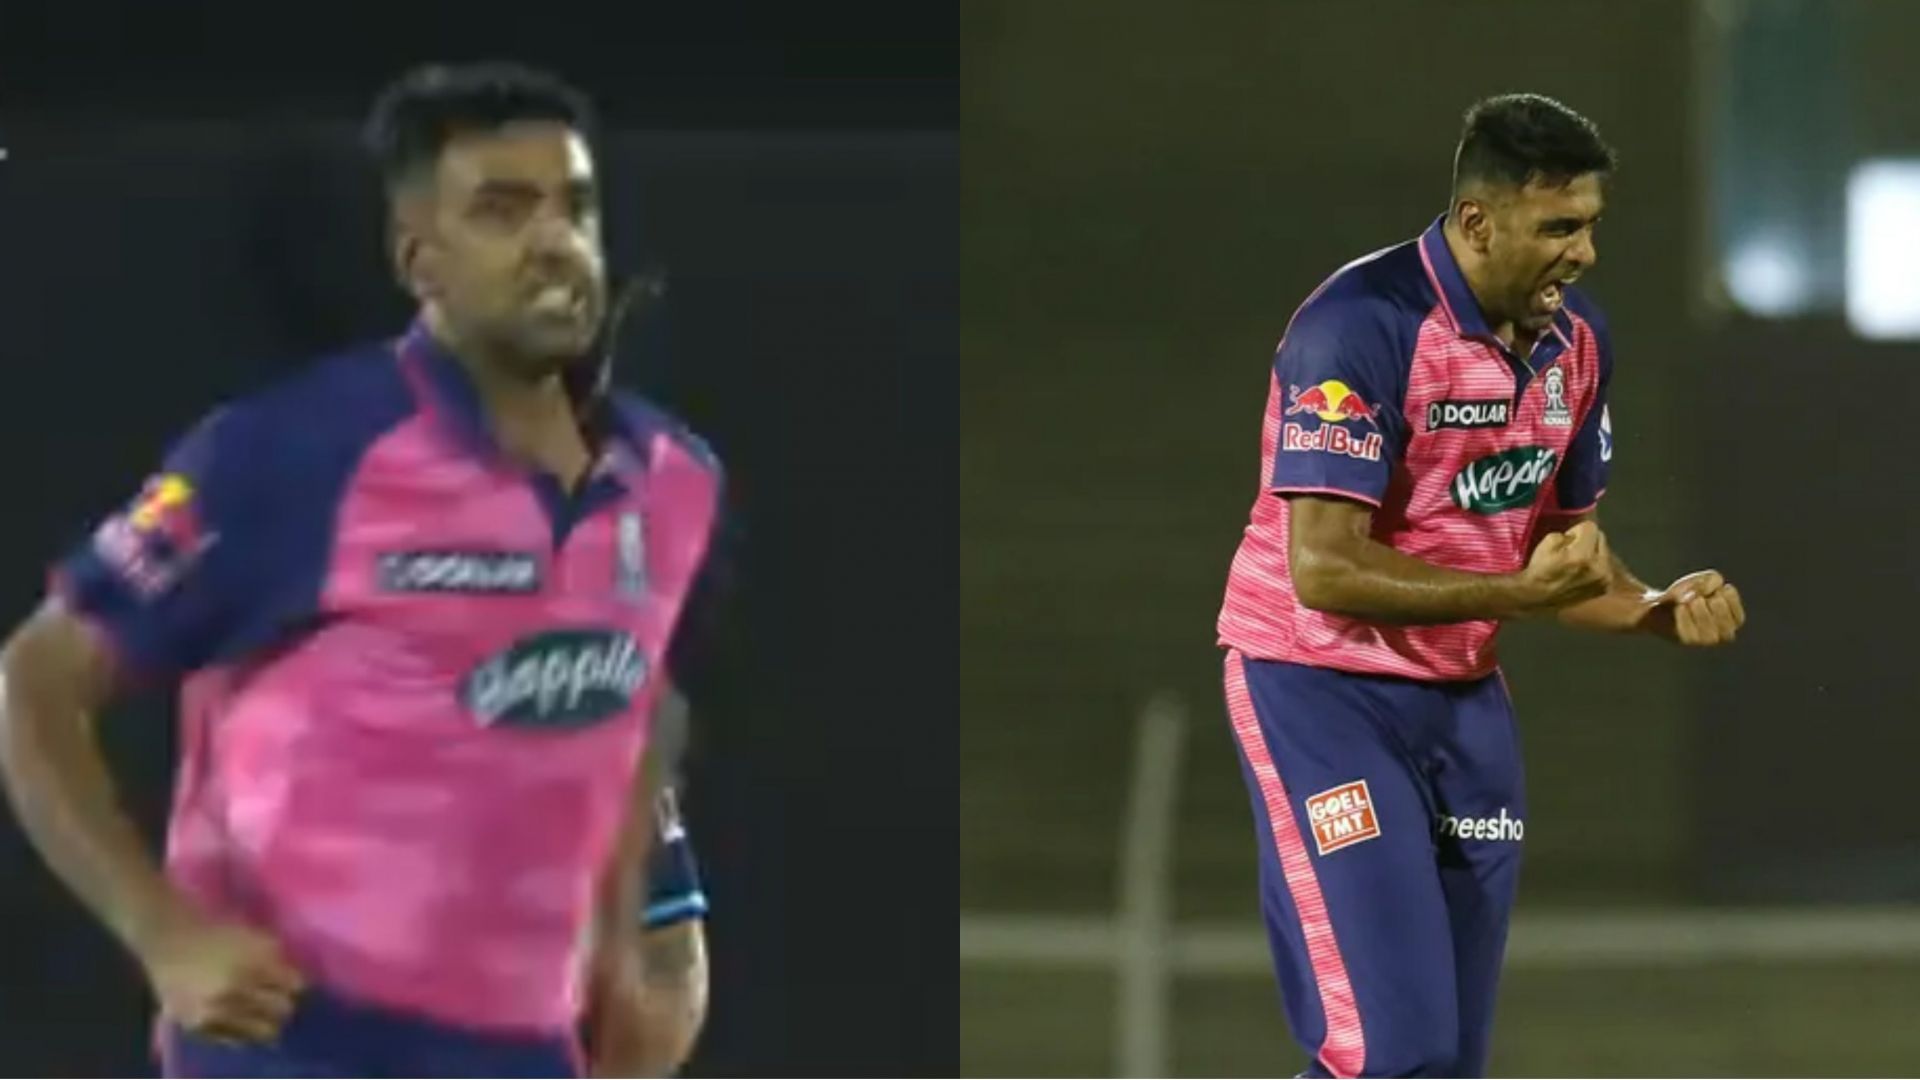 Ravichandran Ashwin could not control his emotions after taking a wicket against his former franchise. (Image Courtesy: IPLT20.com)